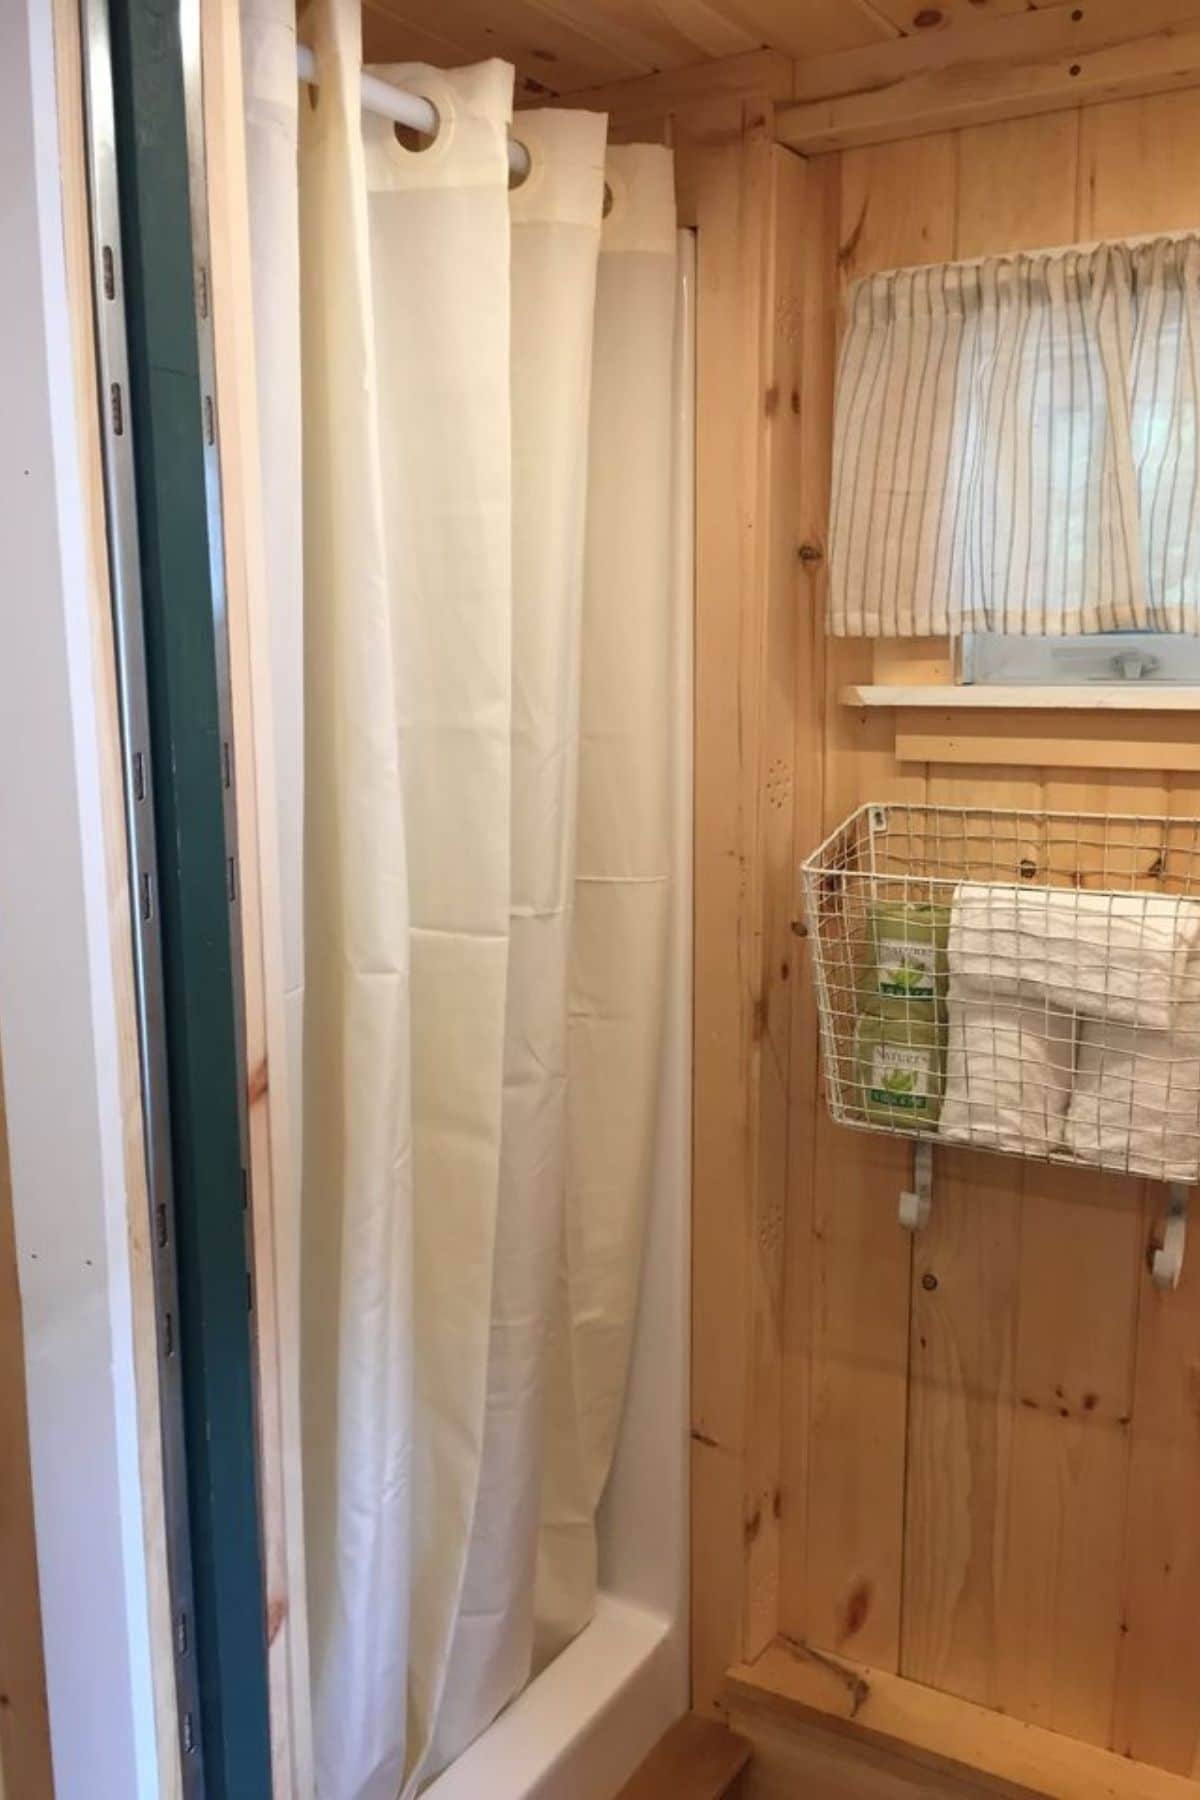 shower stall with white curtain on left and basket hanging beneath window on middle right